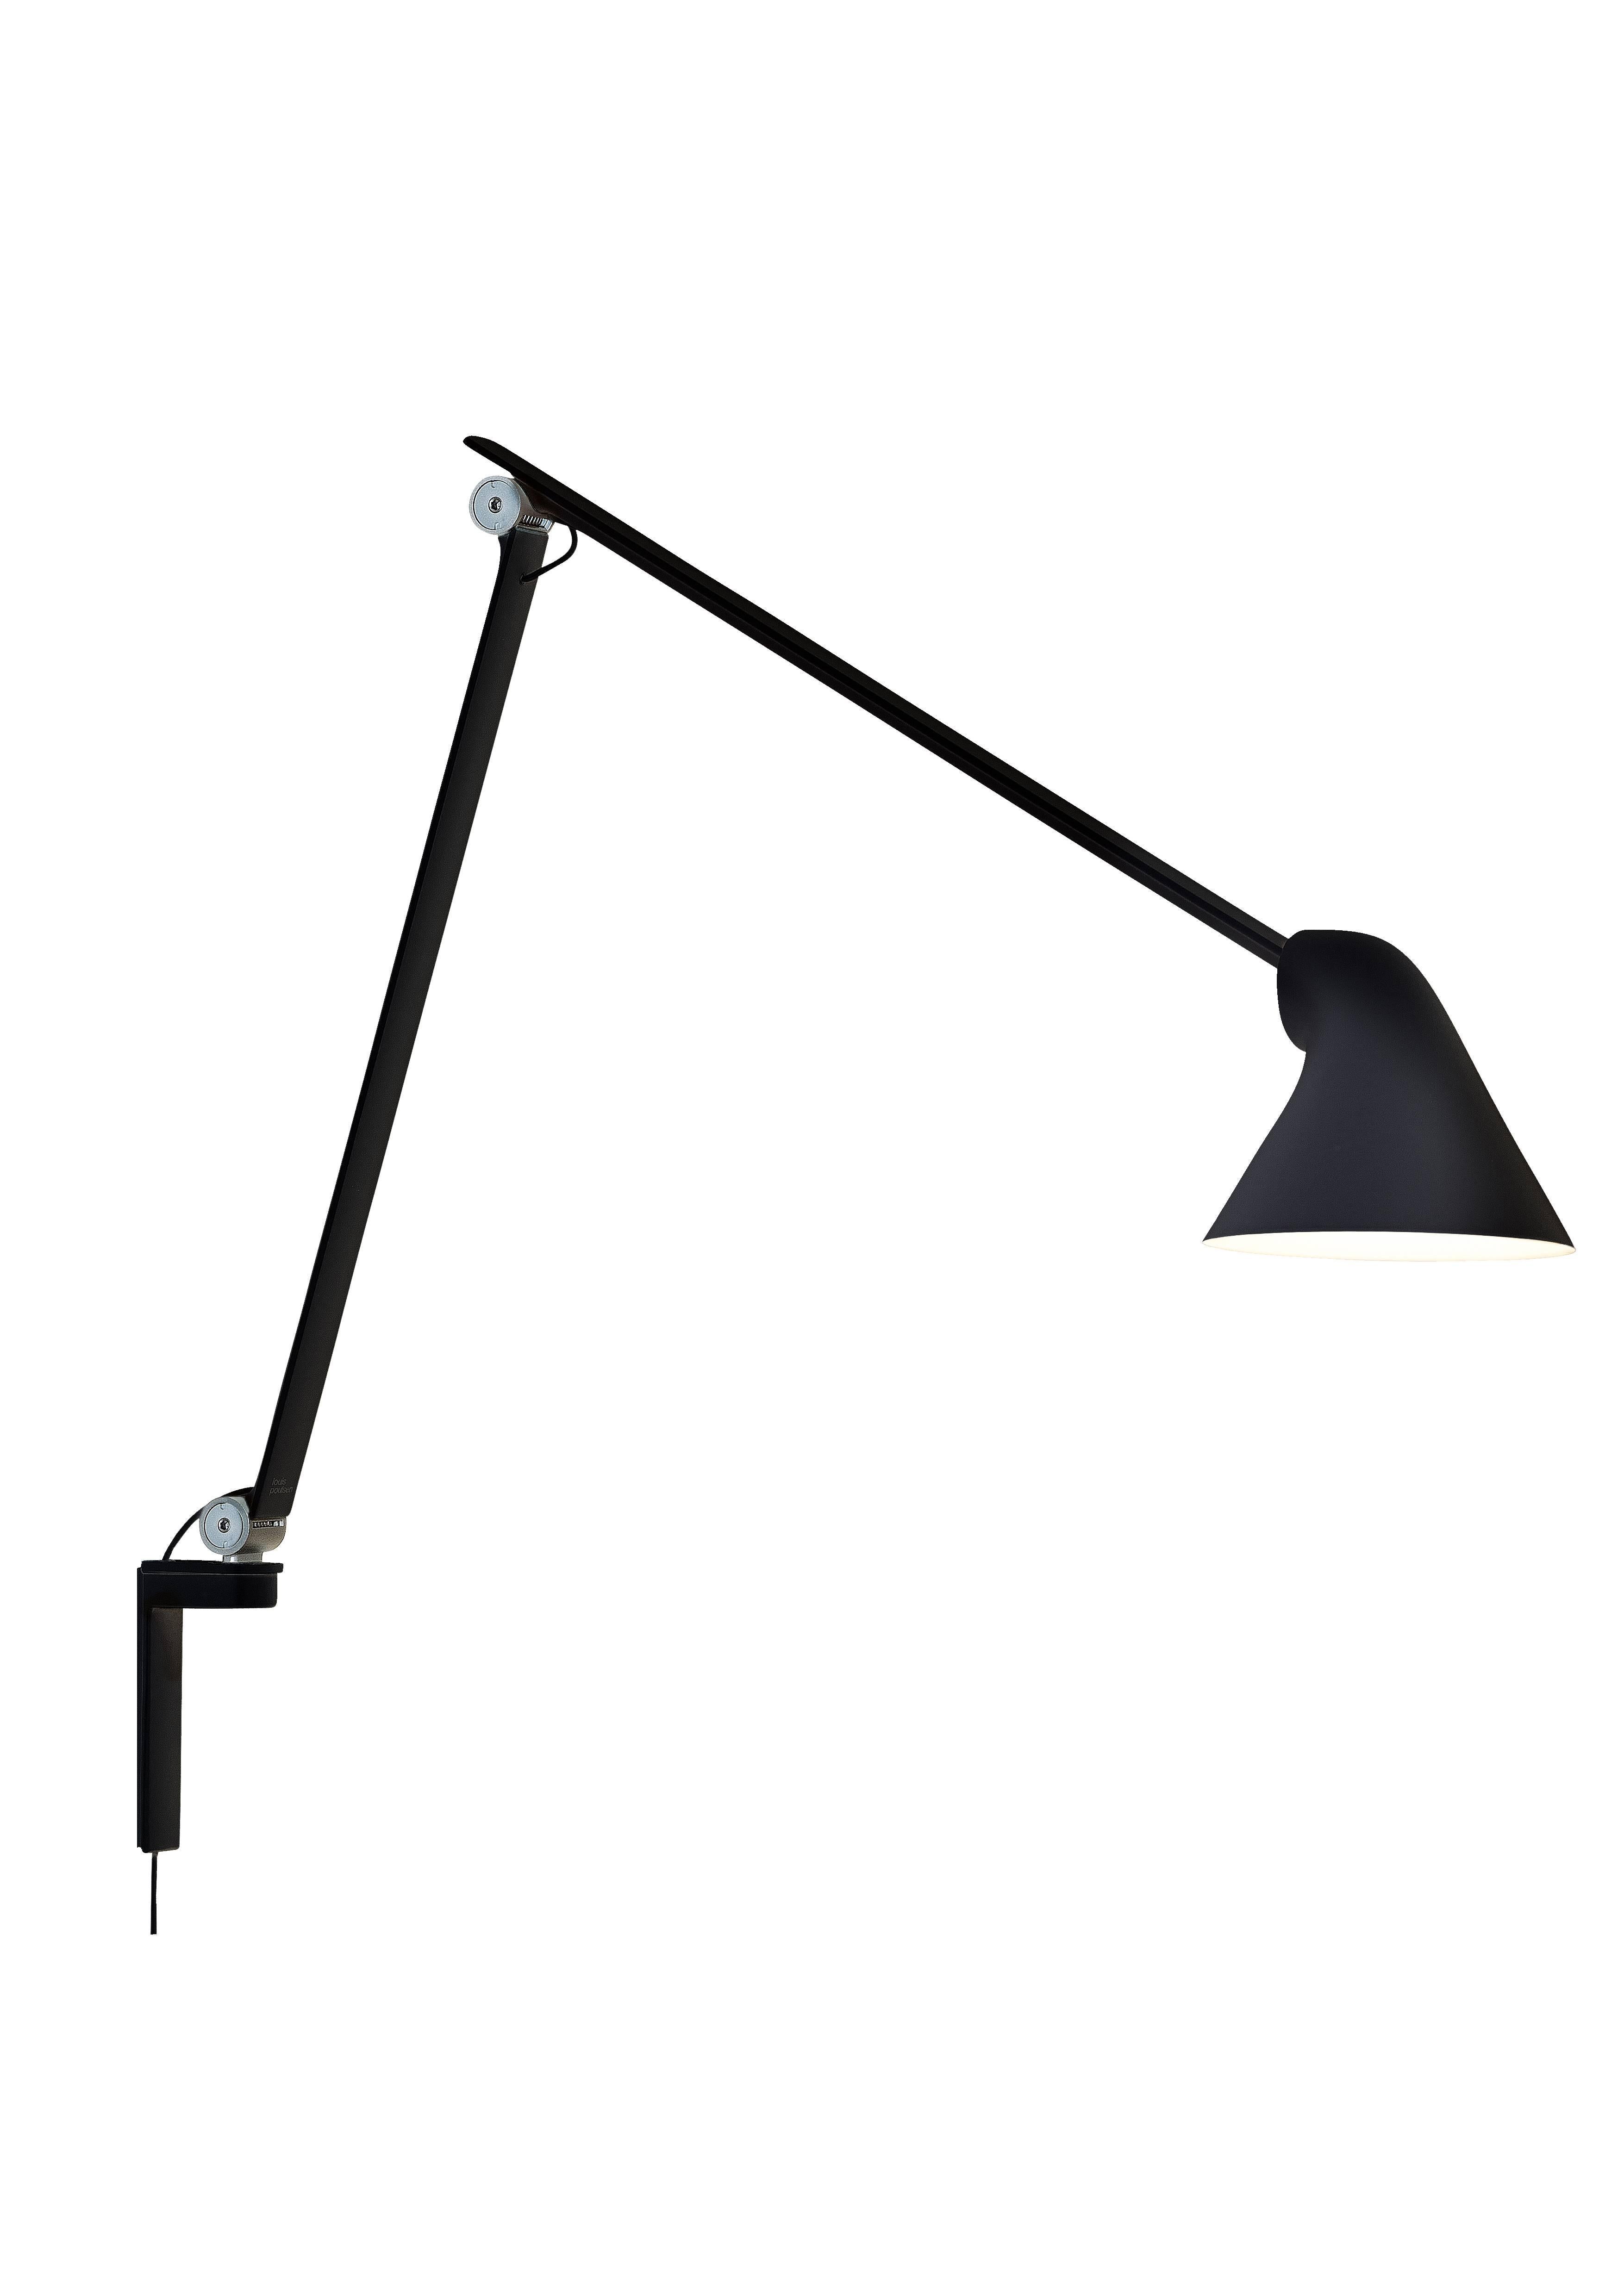 Oki Sato NJP black long wall light for Louis Poulsen. Designed by Oki Sato from Japan's Nendo design studio. Provides direct light perfect for modern living rooms, bedrooms, and home offices. A decorative and functional lighting solution for work